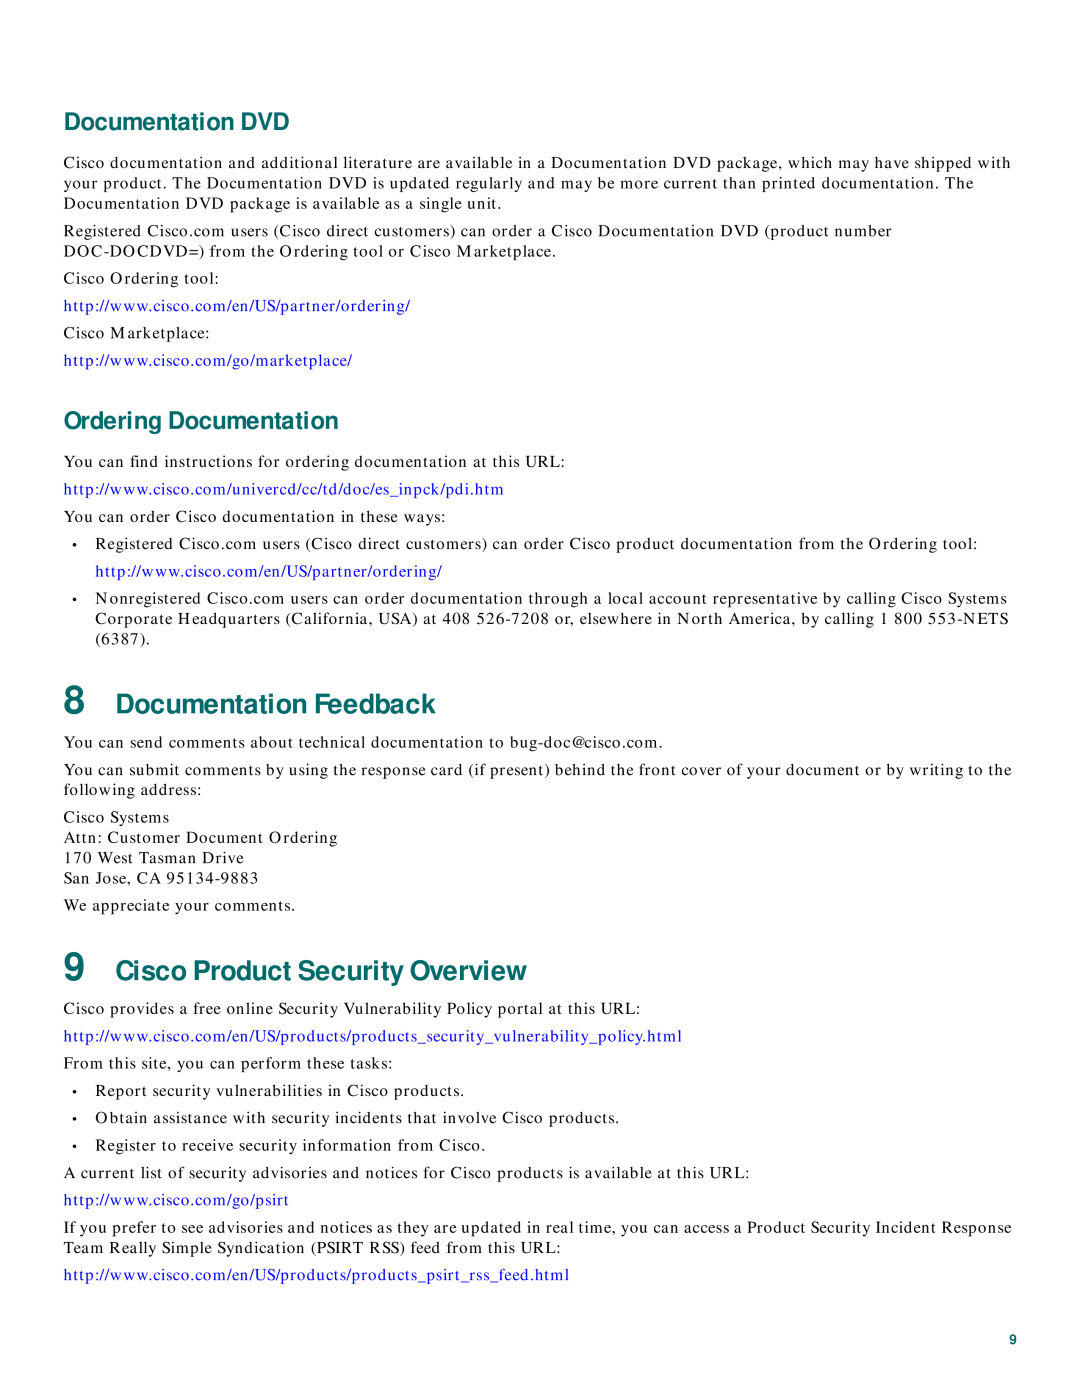 Cisco Systems CISCO1720 Documentation Feedback, Cisco Product Security Overview, Documentation DVD, Ordering Documentation 